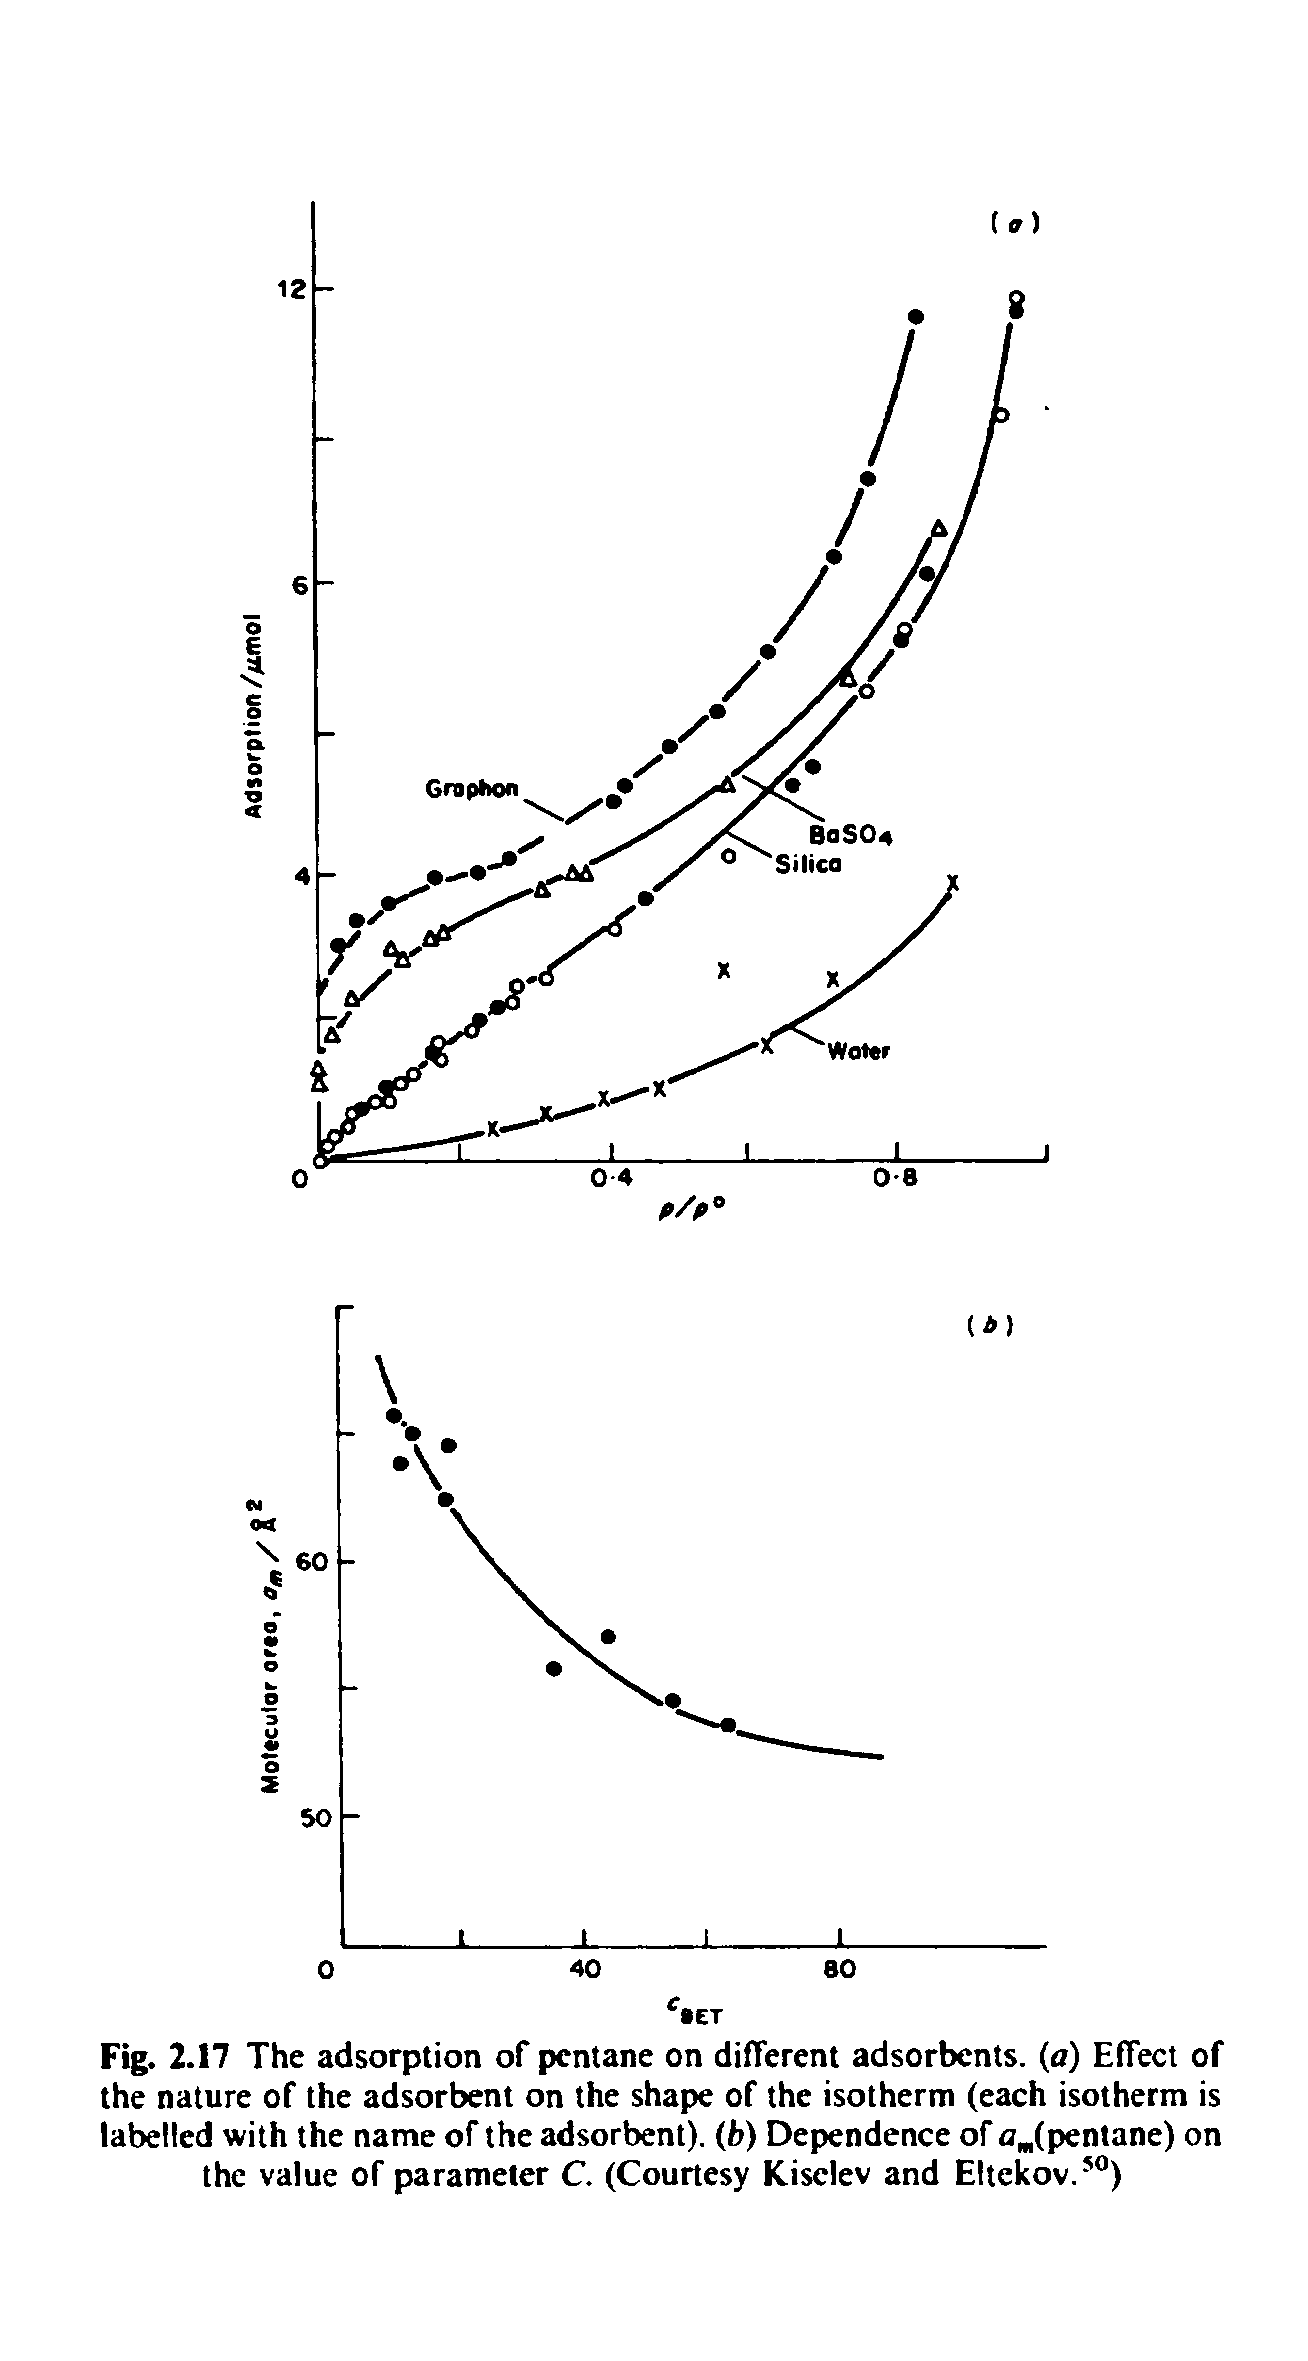 Fig. 2.17 The adsorption of pentane on different adsorbents, (a) Effect of the nature of the adsorbent on the shape of the isotherm (each isotherm is labelled with the name of the adsorbent), (b) Dependence of ajpentane) on the value of parameter C. (Courtesy Kiselev and Eltekov. )...